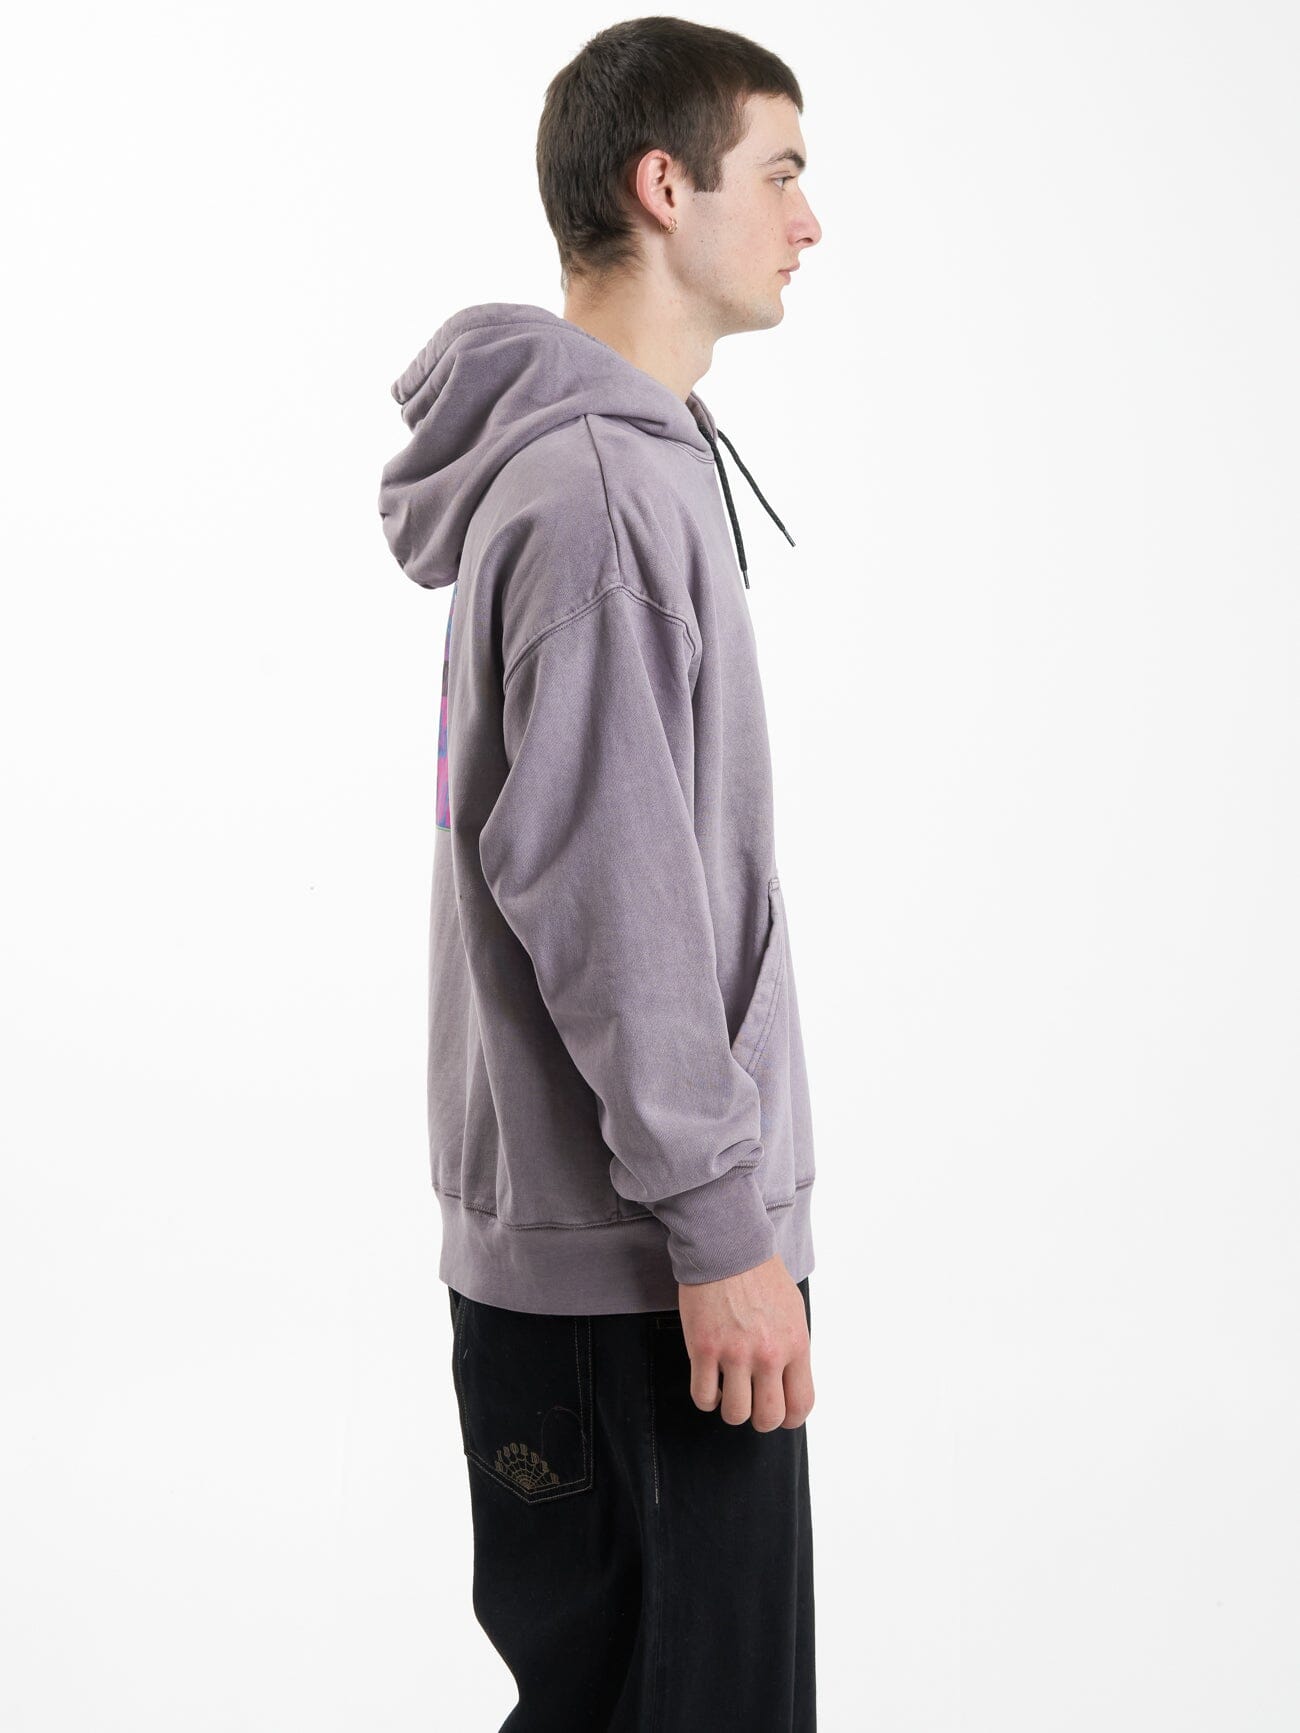 Vibrations Slouch Hood - Mineral Gray